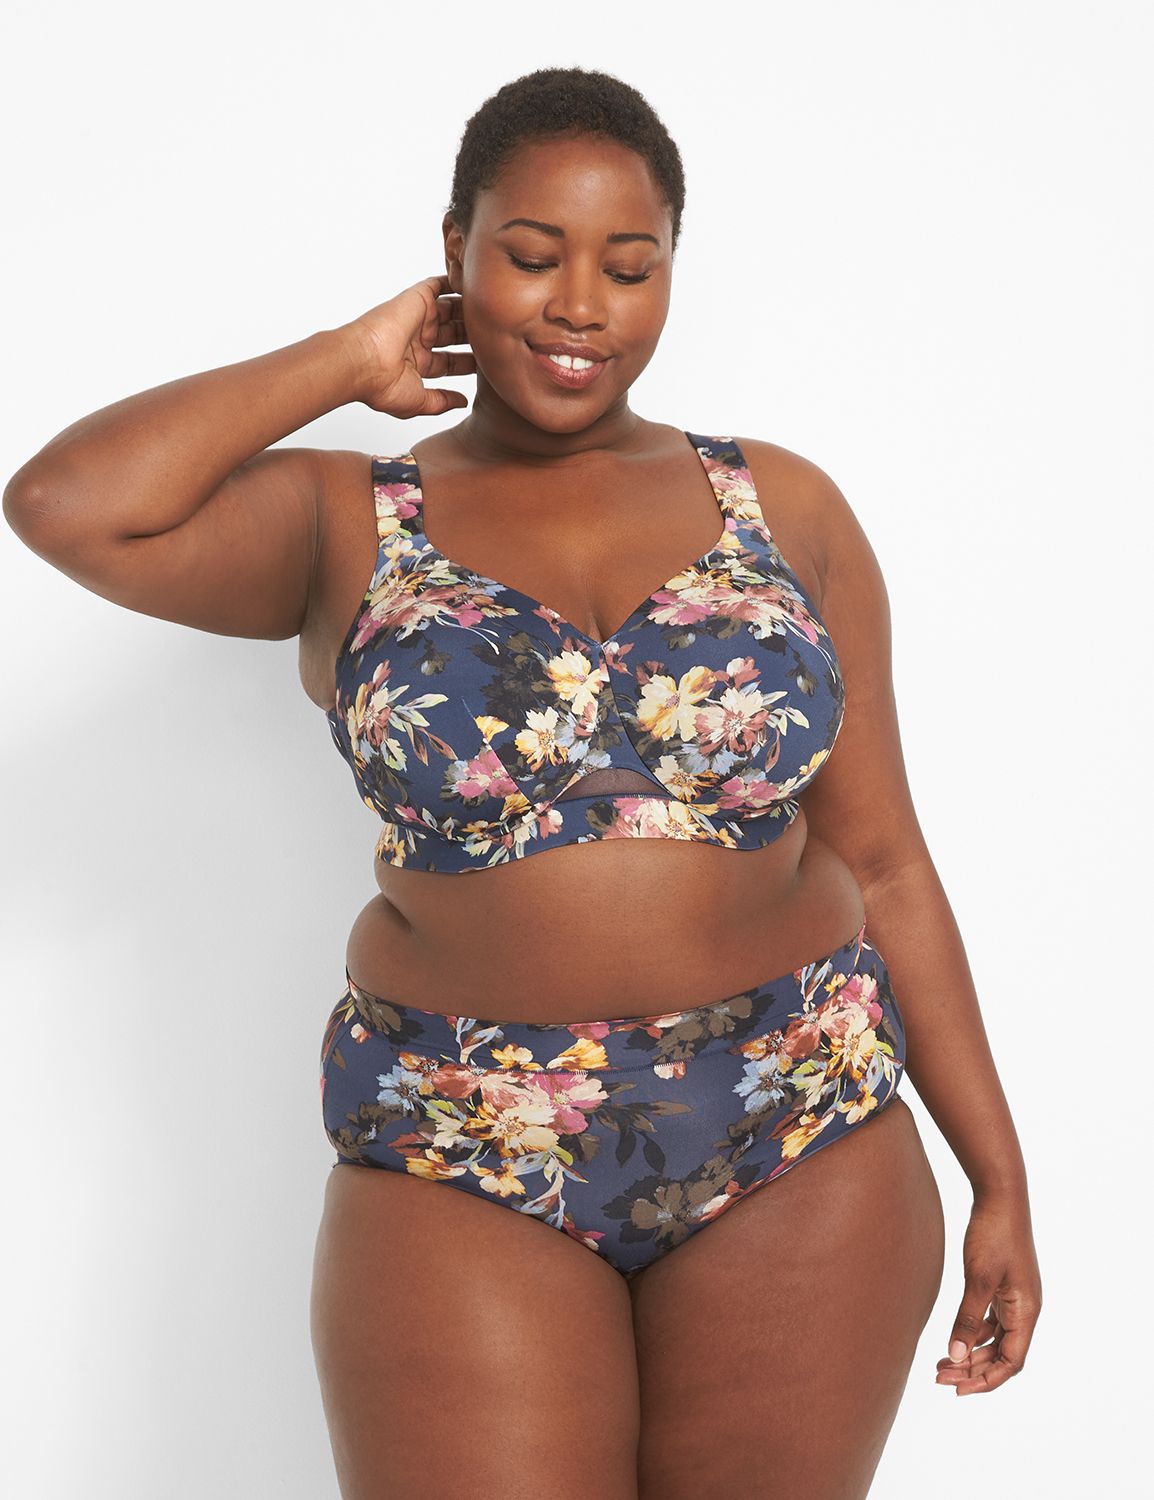 Cool Bliss Bra from Lane Bryant - lolo russell